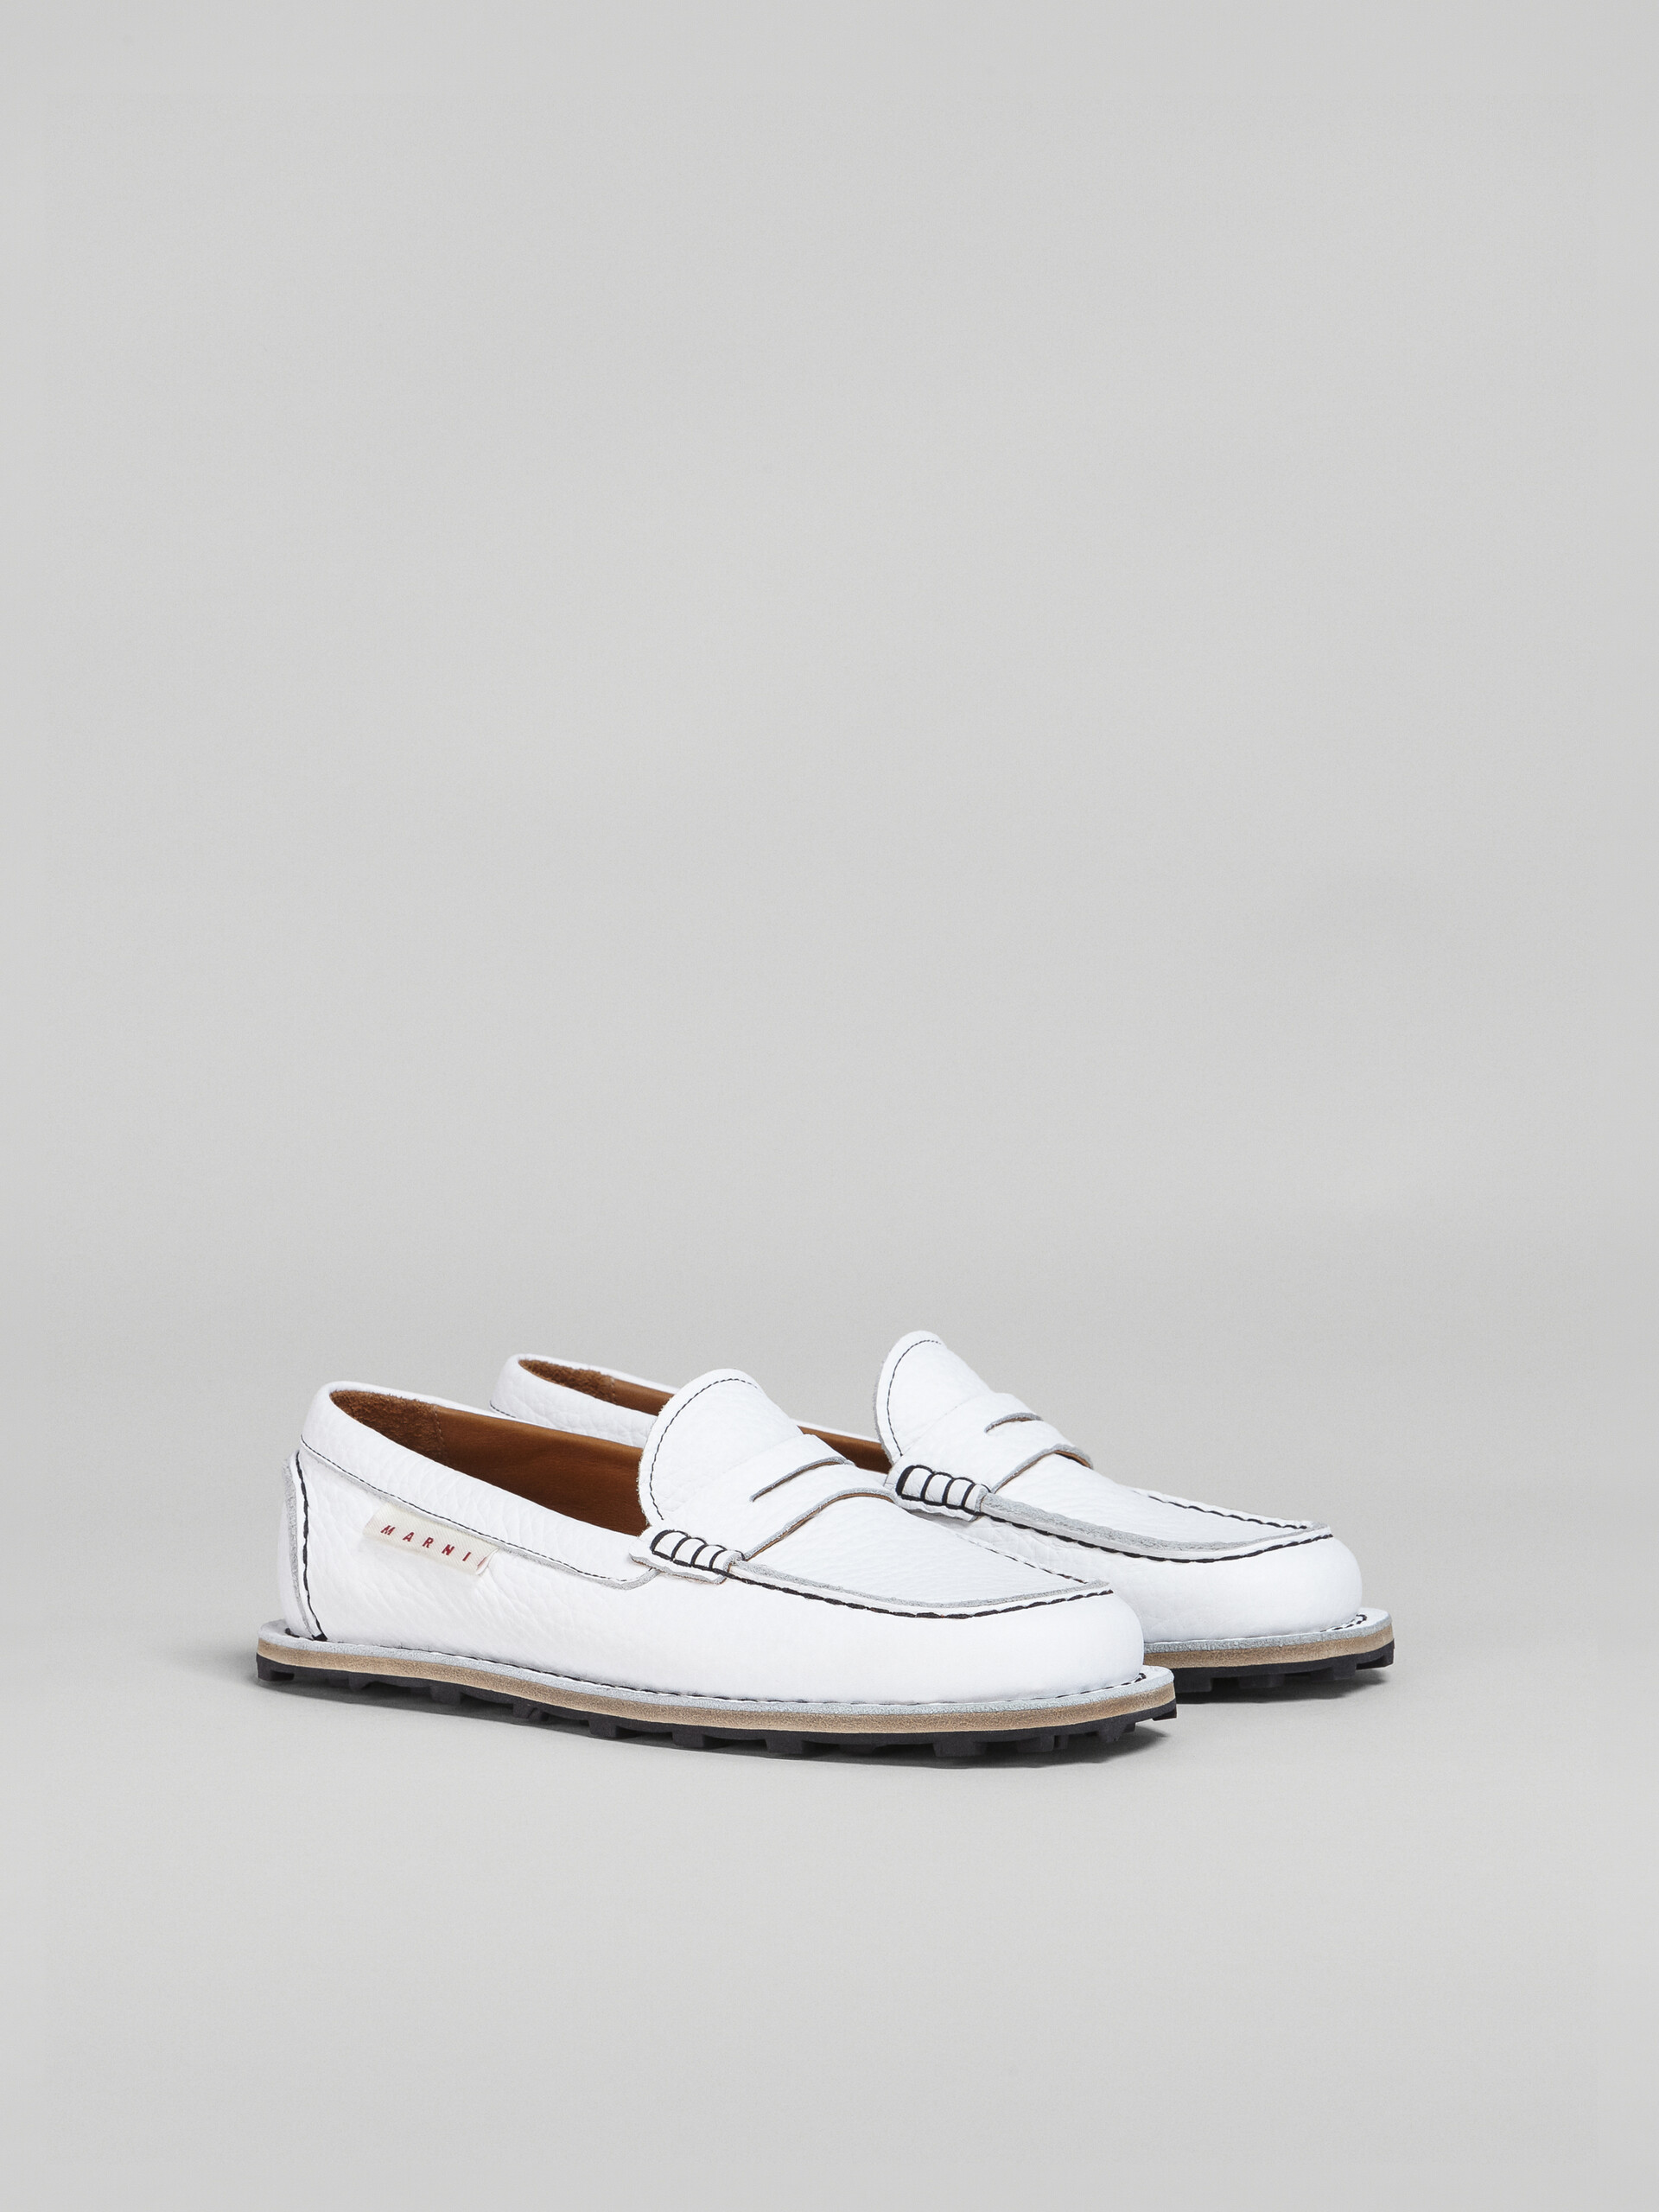 Grained calf leather moccasin - Mocassin - Image 2